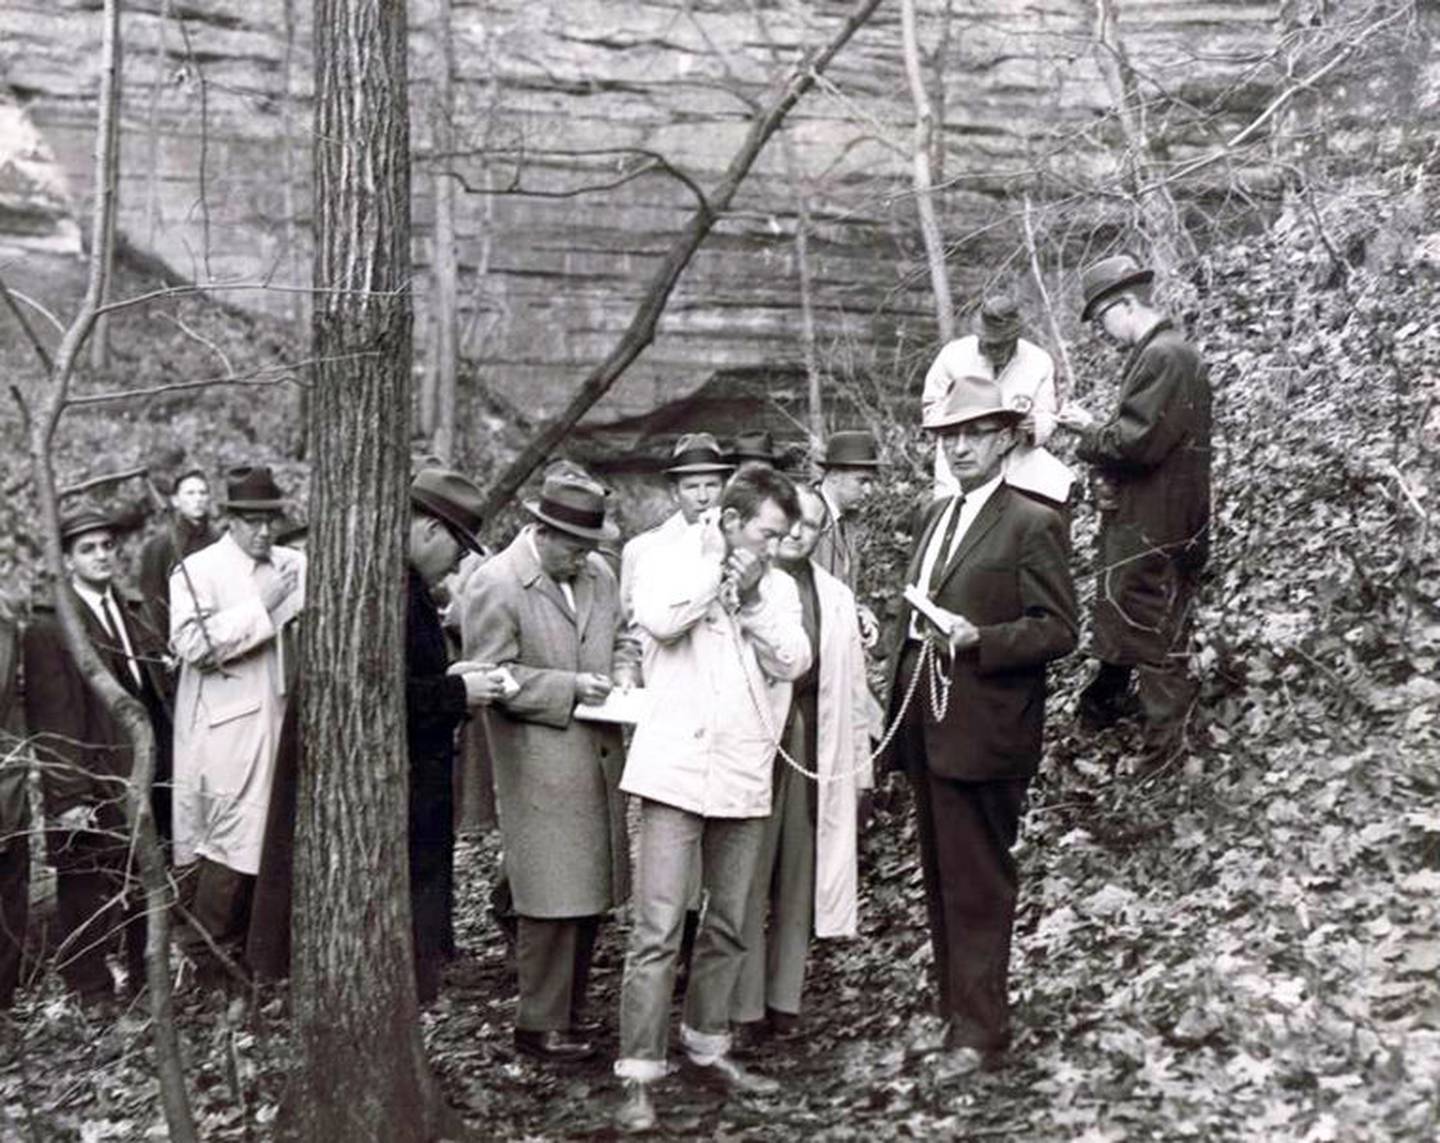 Surrounded by reporters from across the Midwest on Nov. 17, 1960, Chester Weger held in chains by Sheriff Ray Eutsey reenacts the crime in which he confessed to killing three women from Riverside inside St. Louis Canyon at Starved Rock State Park on Marh14 of that year. Weger now claims he was physically abused into making those admissions and has again petition the state for parole.